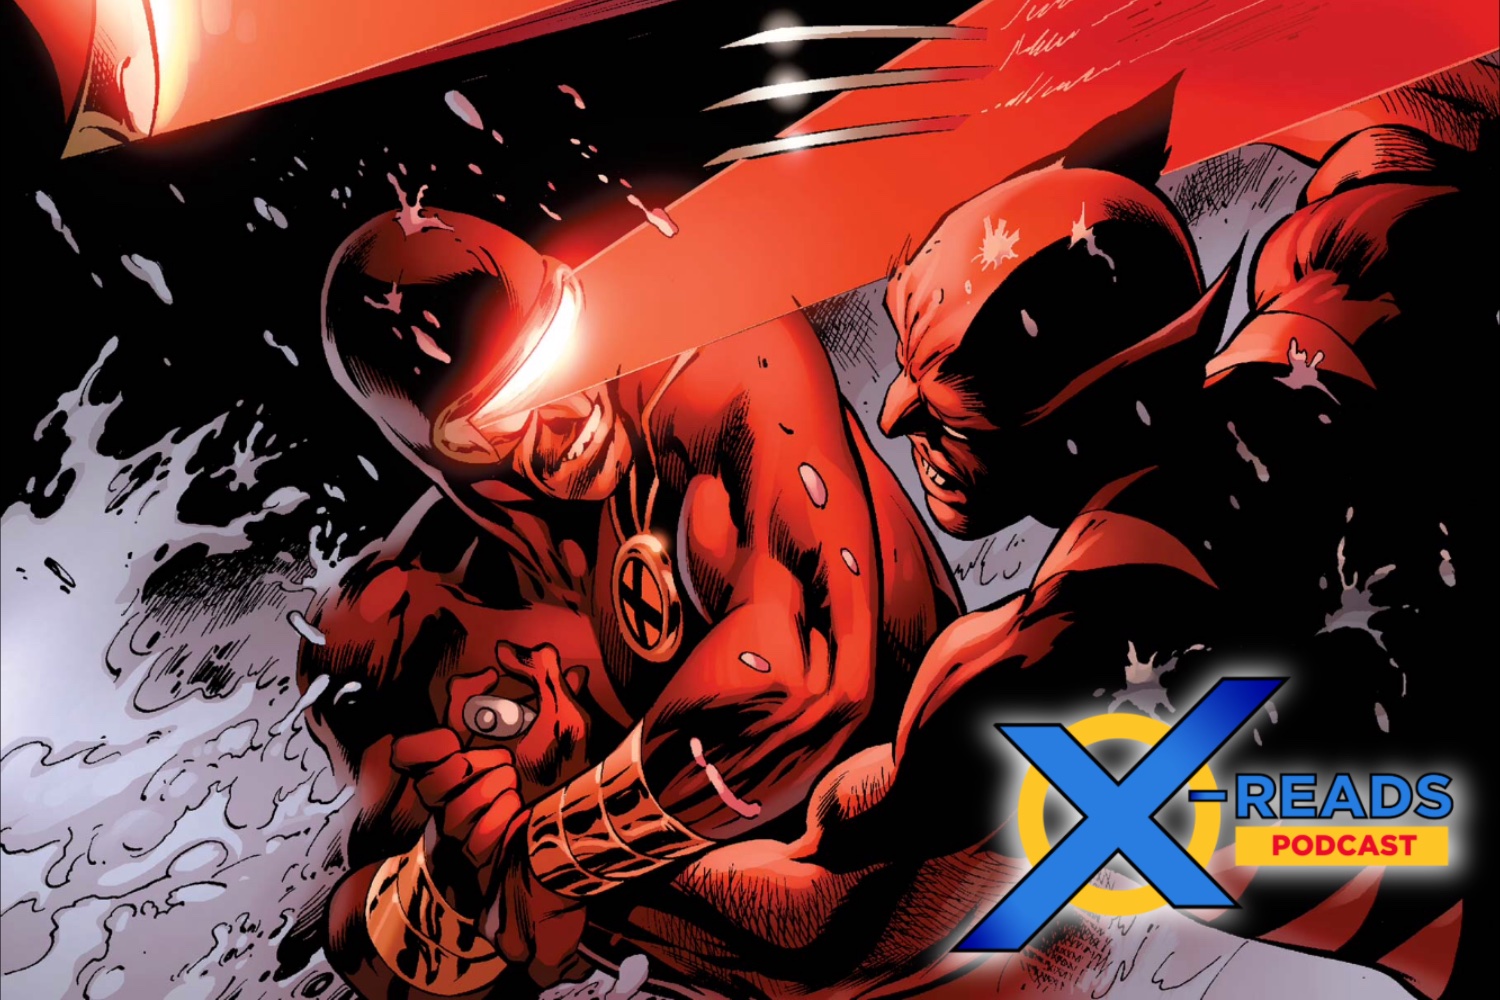 X-Reads Podcast Episode 77: 'X-Men: Schism' #4 with Justice from Shortboxed